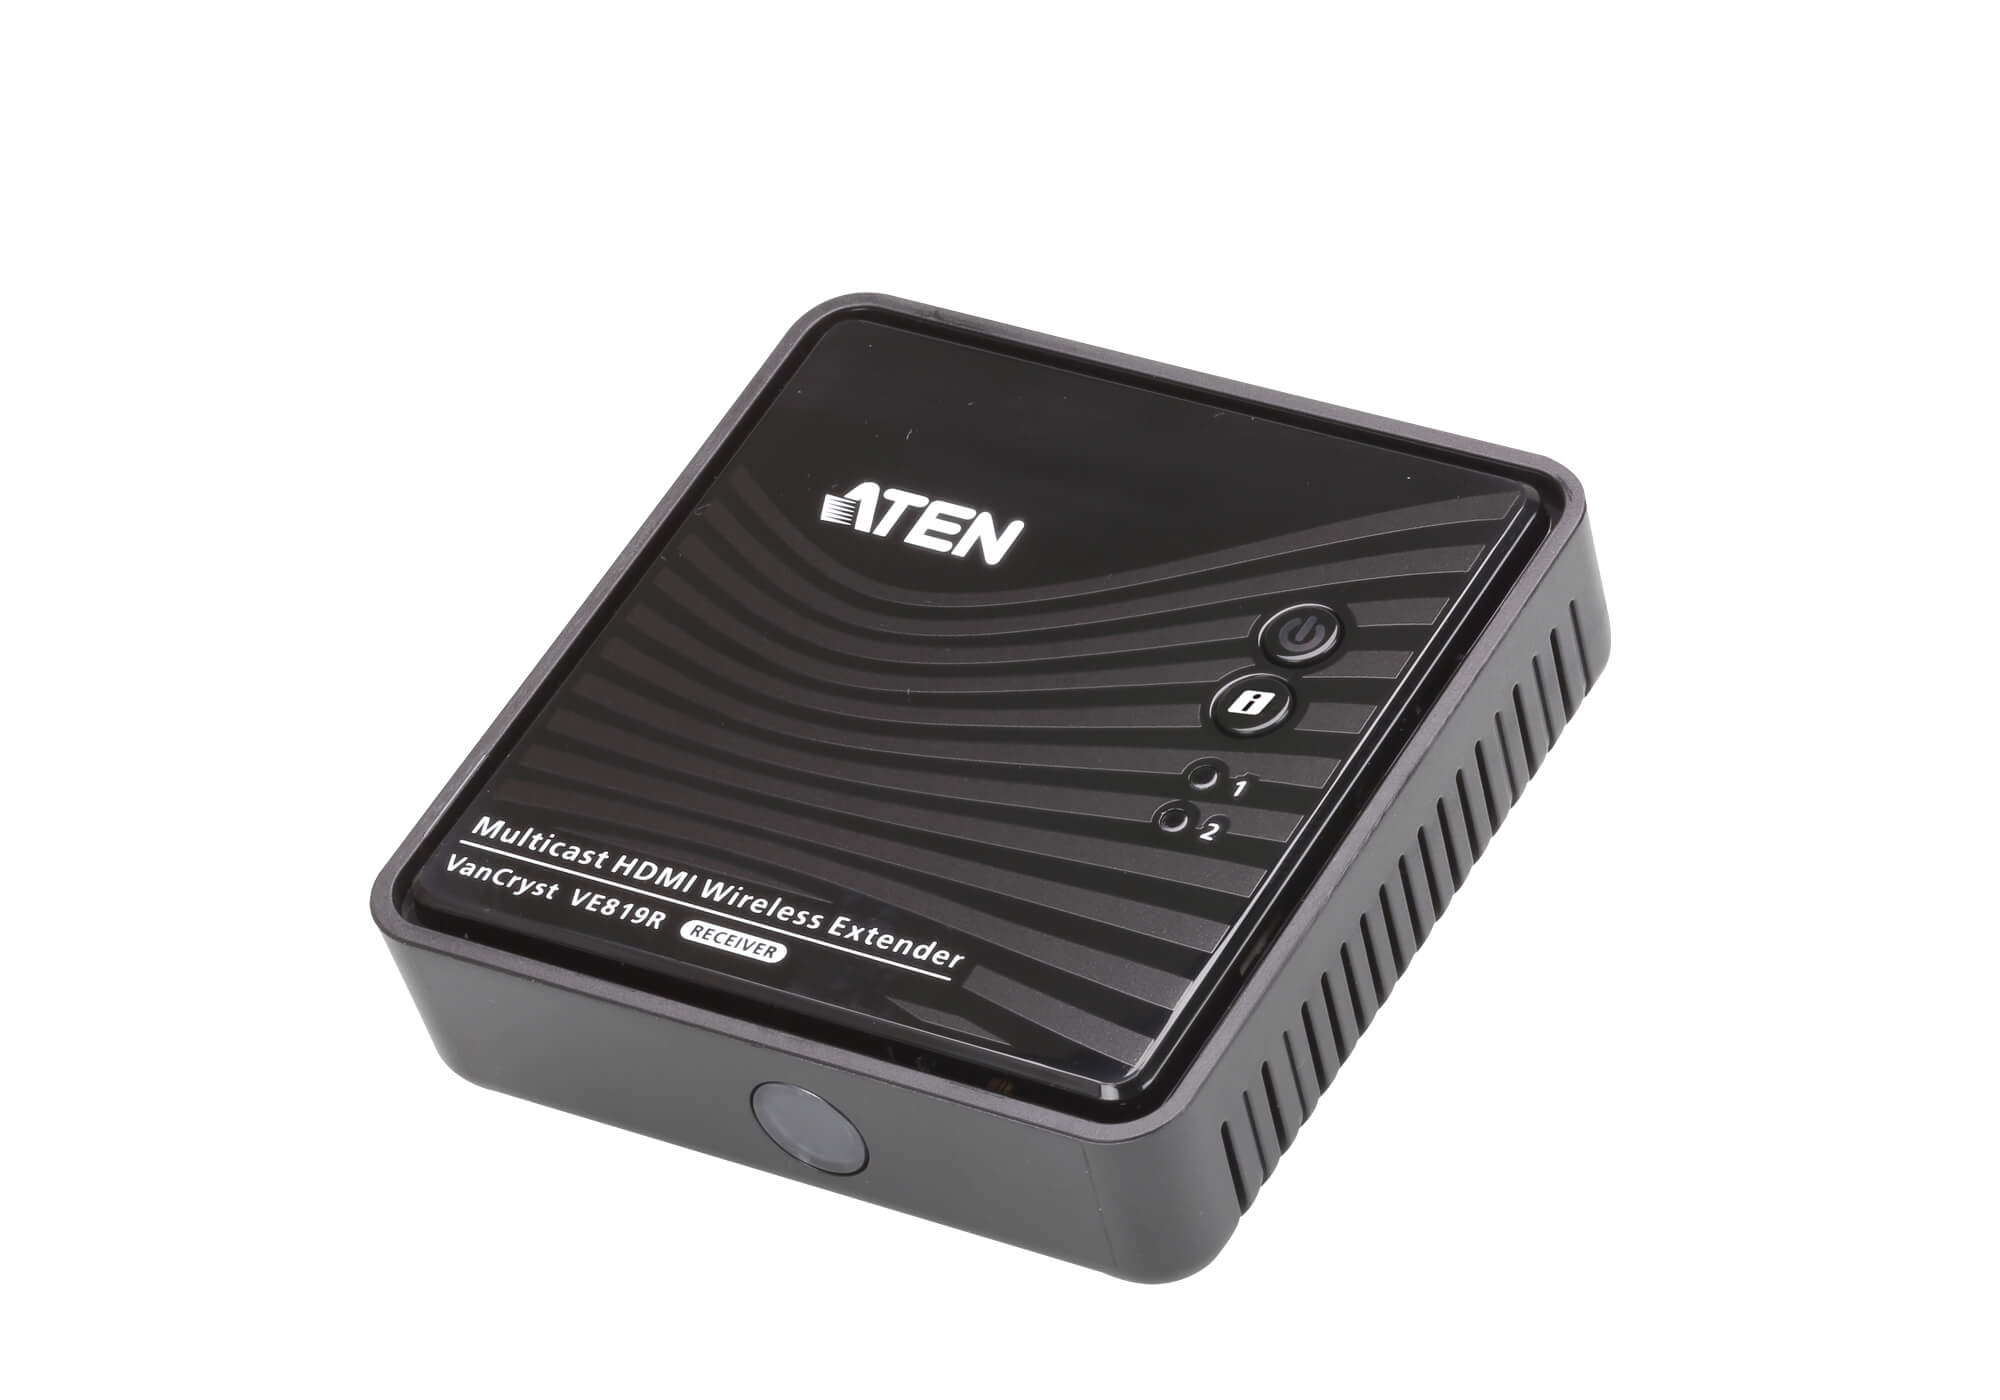 ATEN HDMI Wireless Extender Dongle + Receiver, supports up to 1080p @ 10m, supports up to 4 Dongle transm